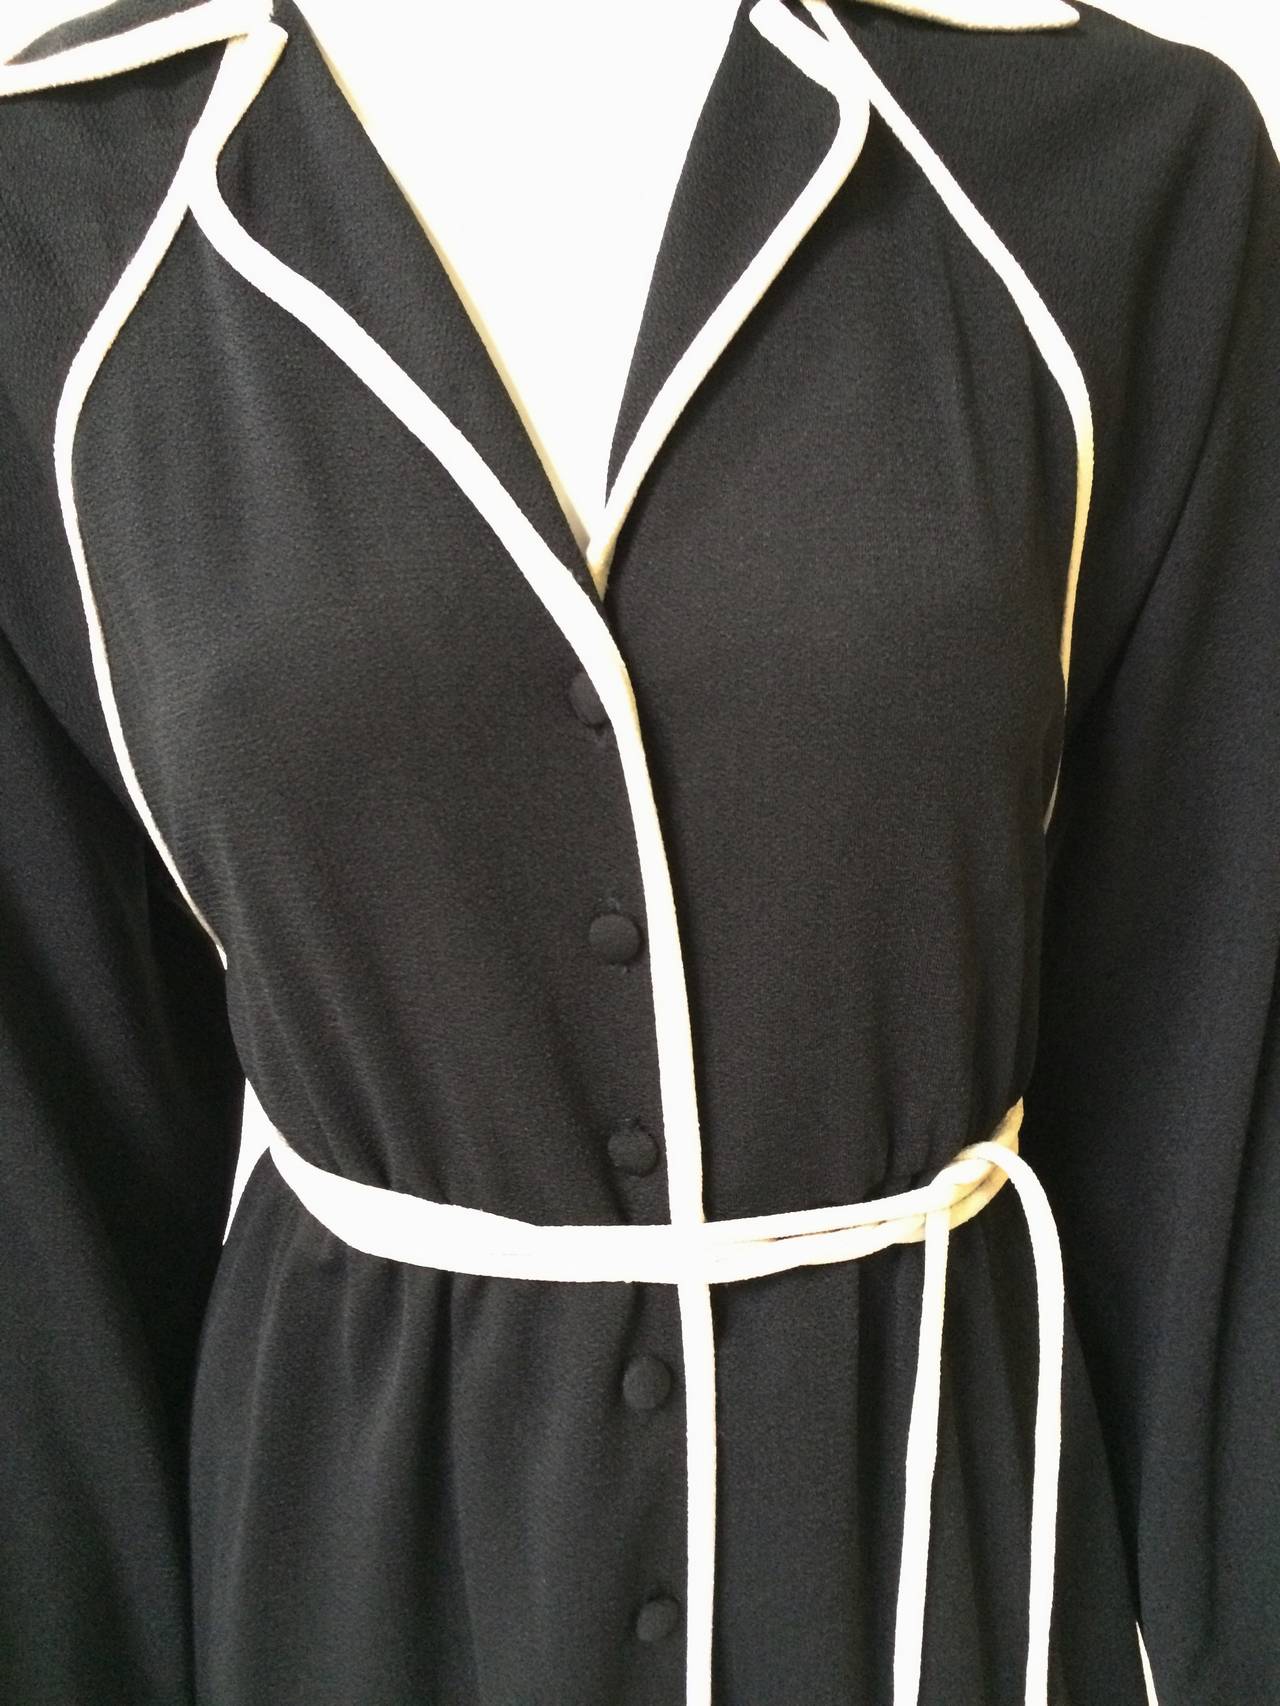 Donald Brooks 1970s black with white trim fabric cover buttons dress with belt.  Dress size labels is 8 but fits the mannequin nicely which is a size 4. Ladies please grab your best friend, Mr. Tape Measure, so you can properly measure your bust,